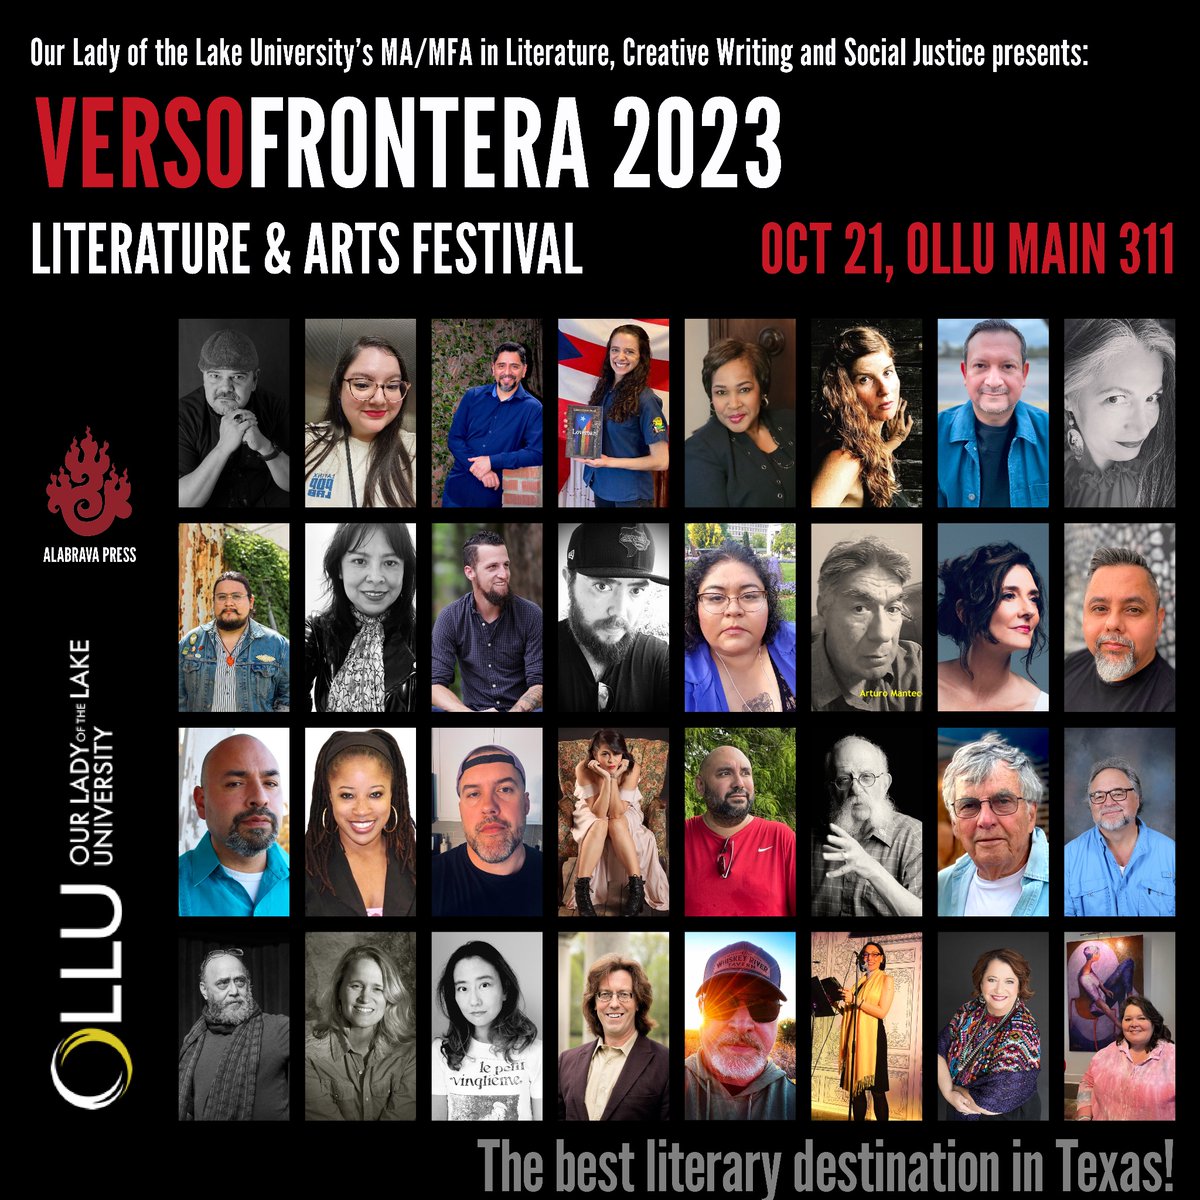 VersoFrontera: The best literary destination in Texas! Don’t miss these featured writers! @FronteraVerso #versofrontera #Writer #alabravapress #poetry